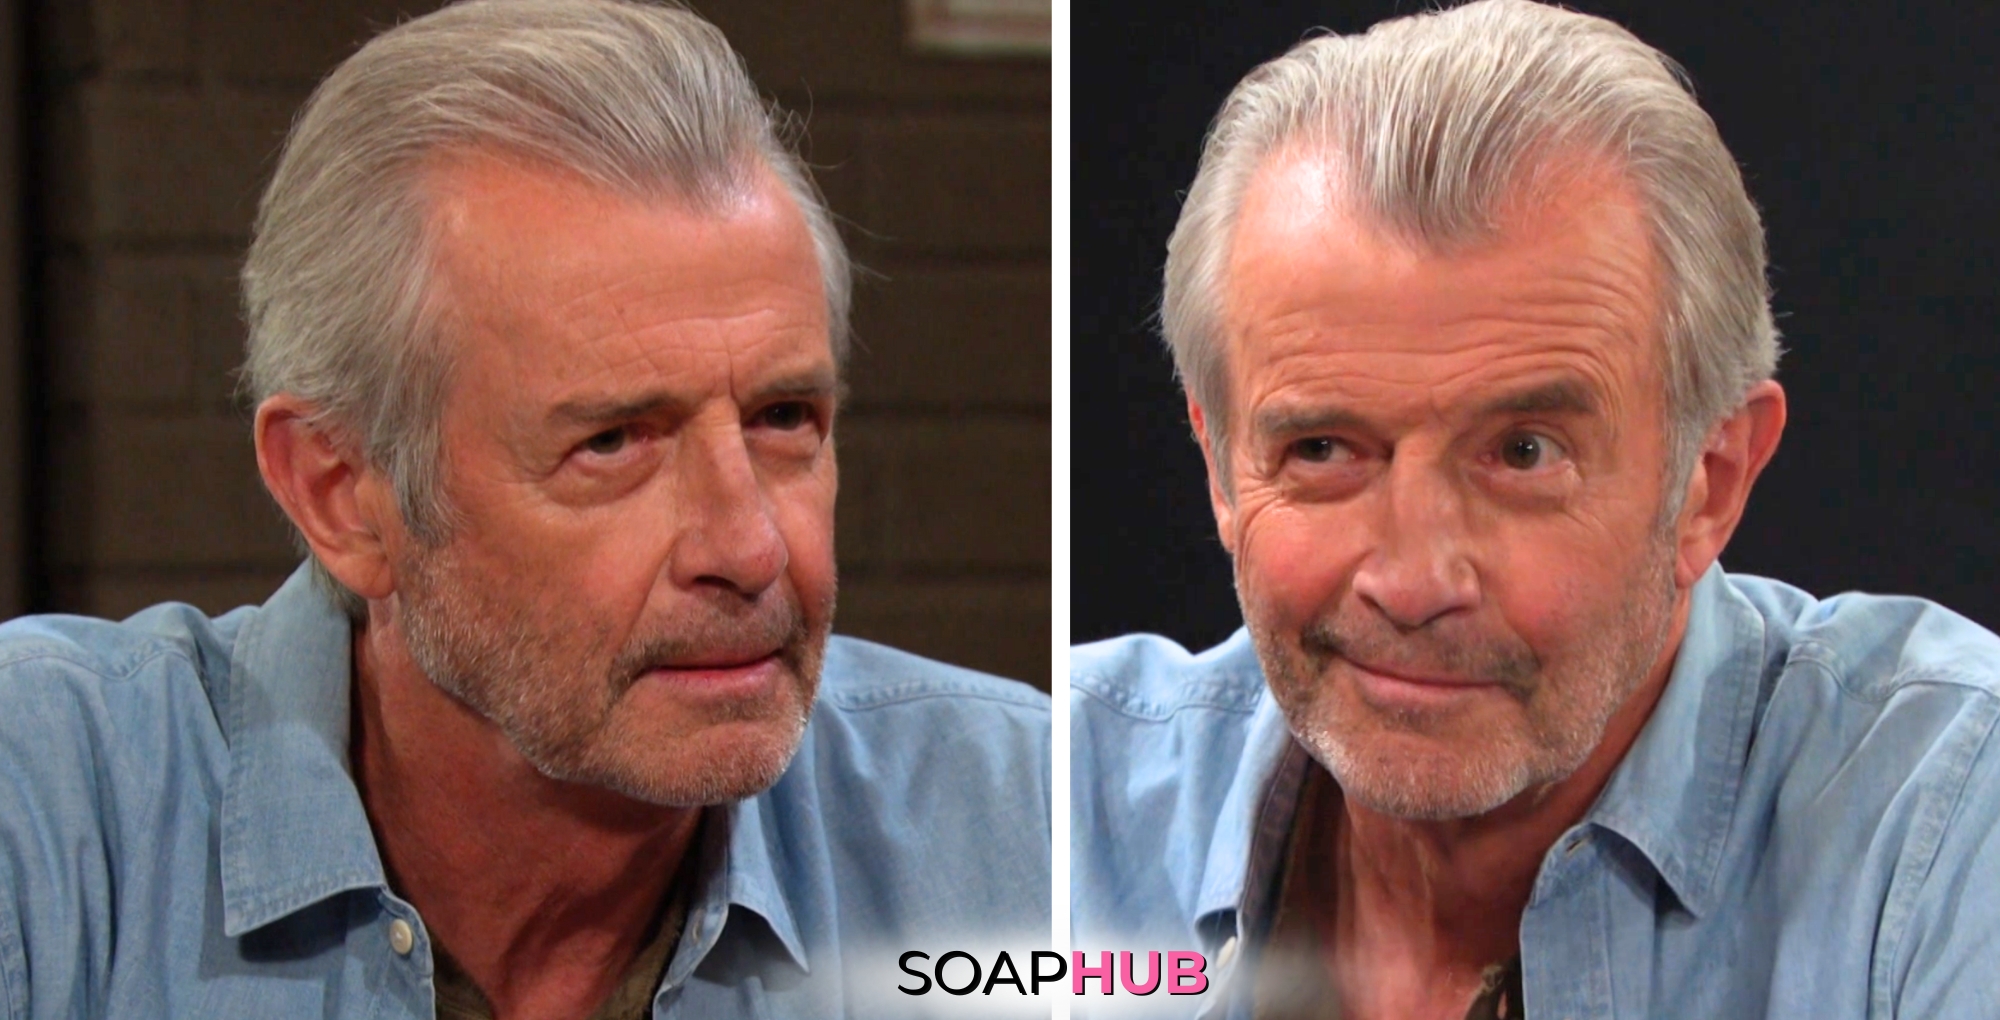 Days of our Lives spoilers feature two images of Clyde Weston with a Soap Hub logo across the bottom.